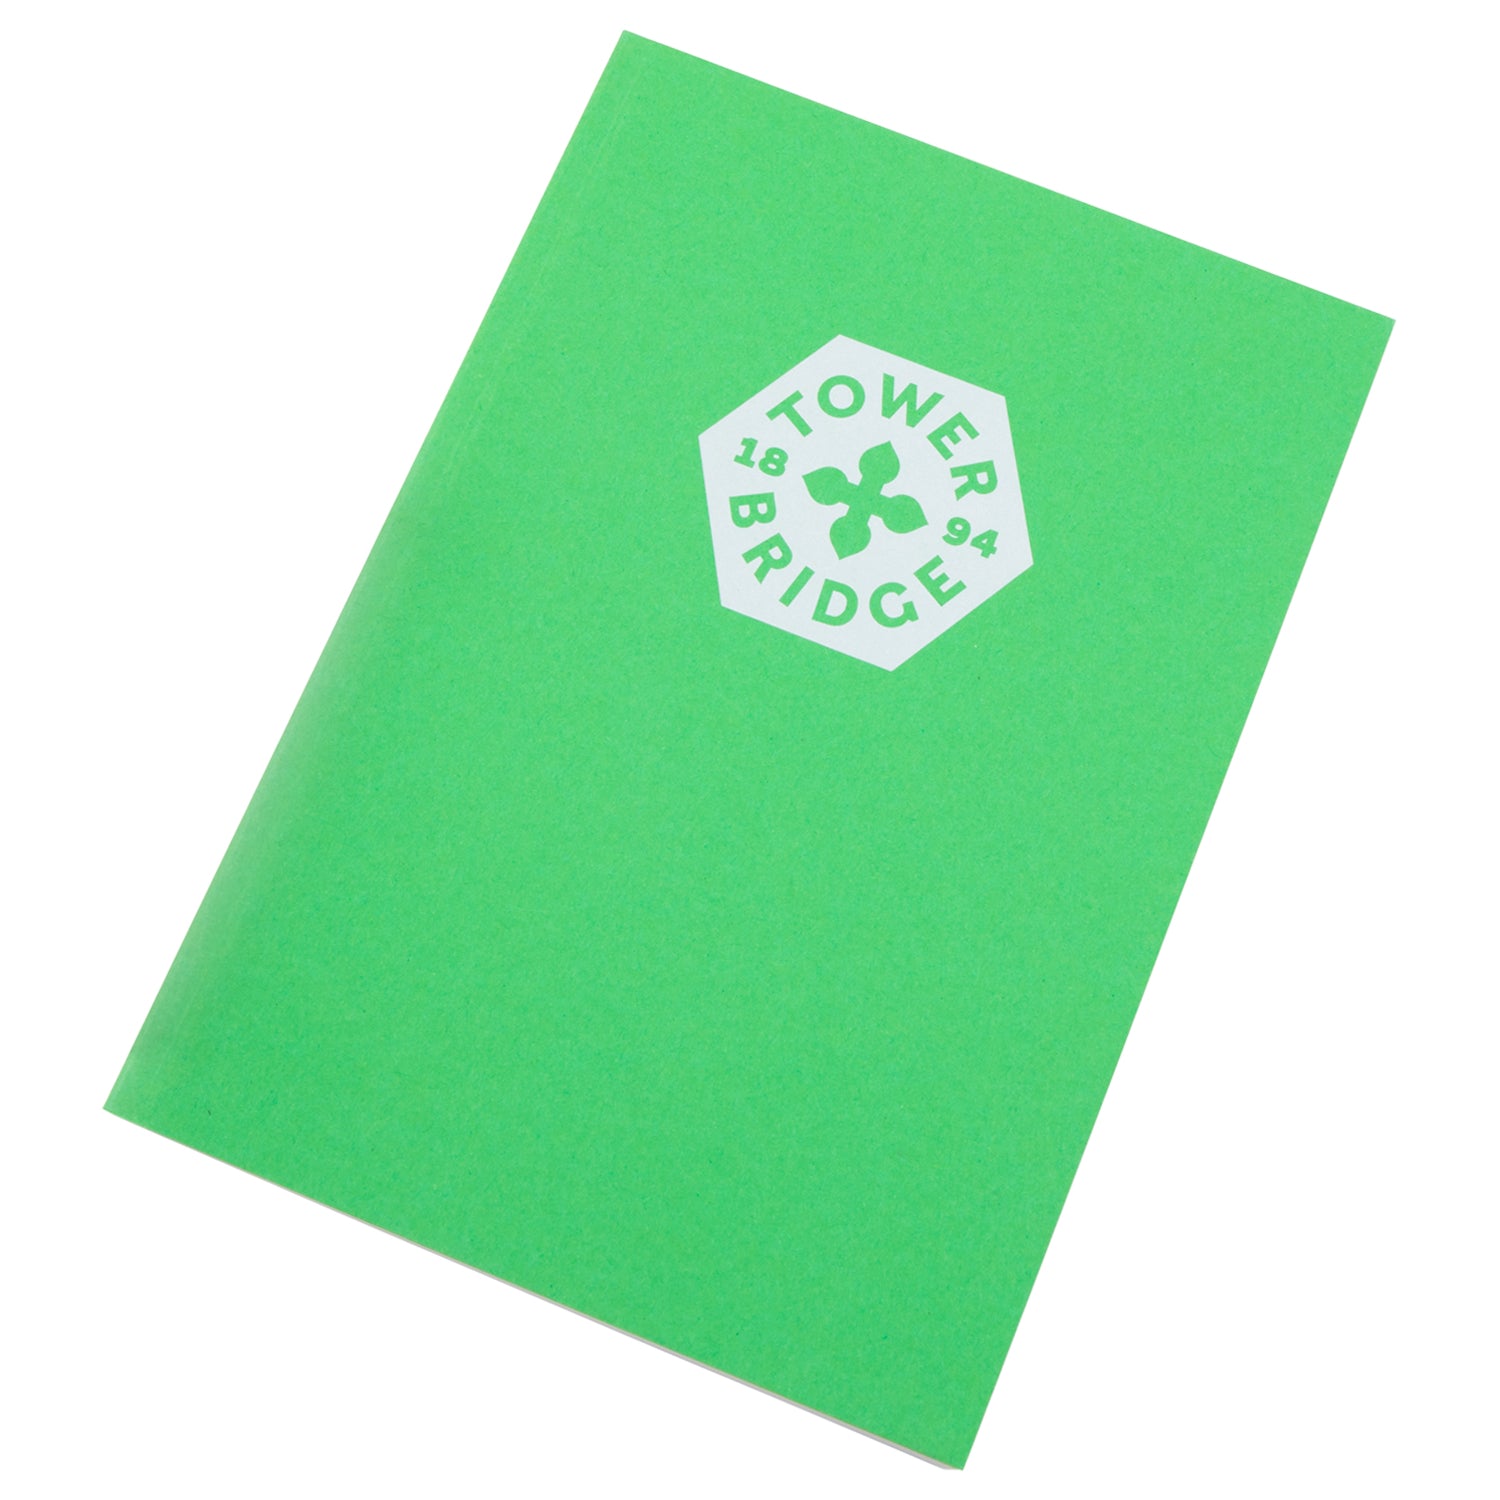 Tower Bridge Eco Recycled Till Receipts Notebook A5 - Green